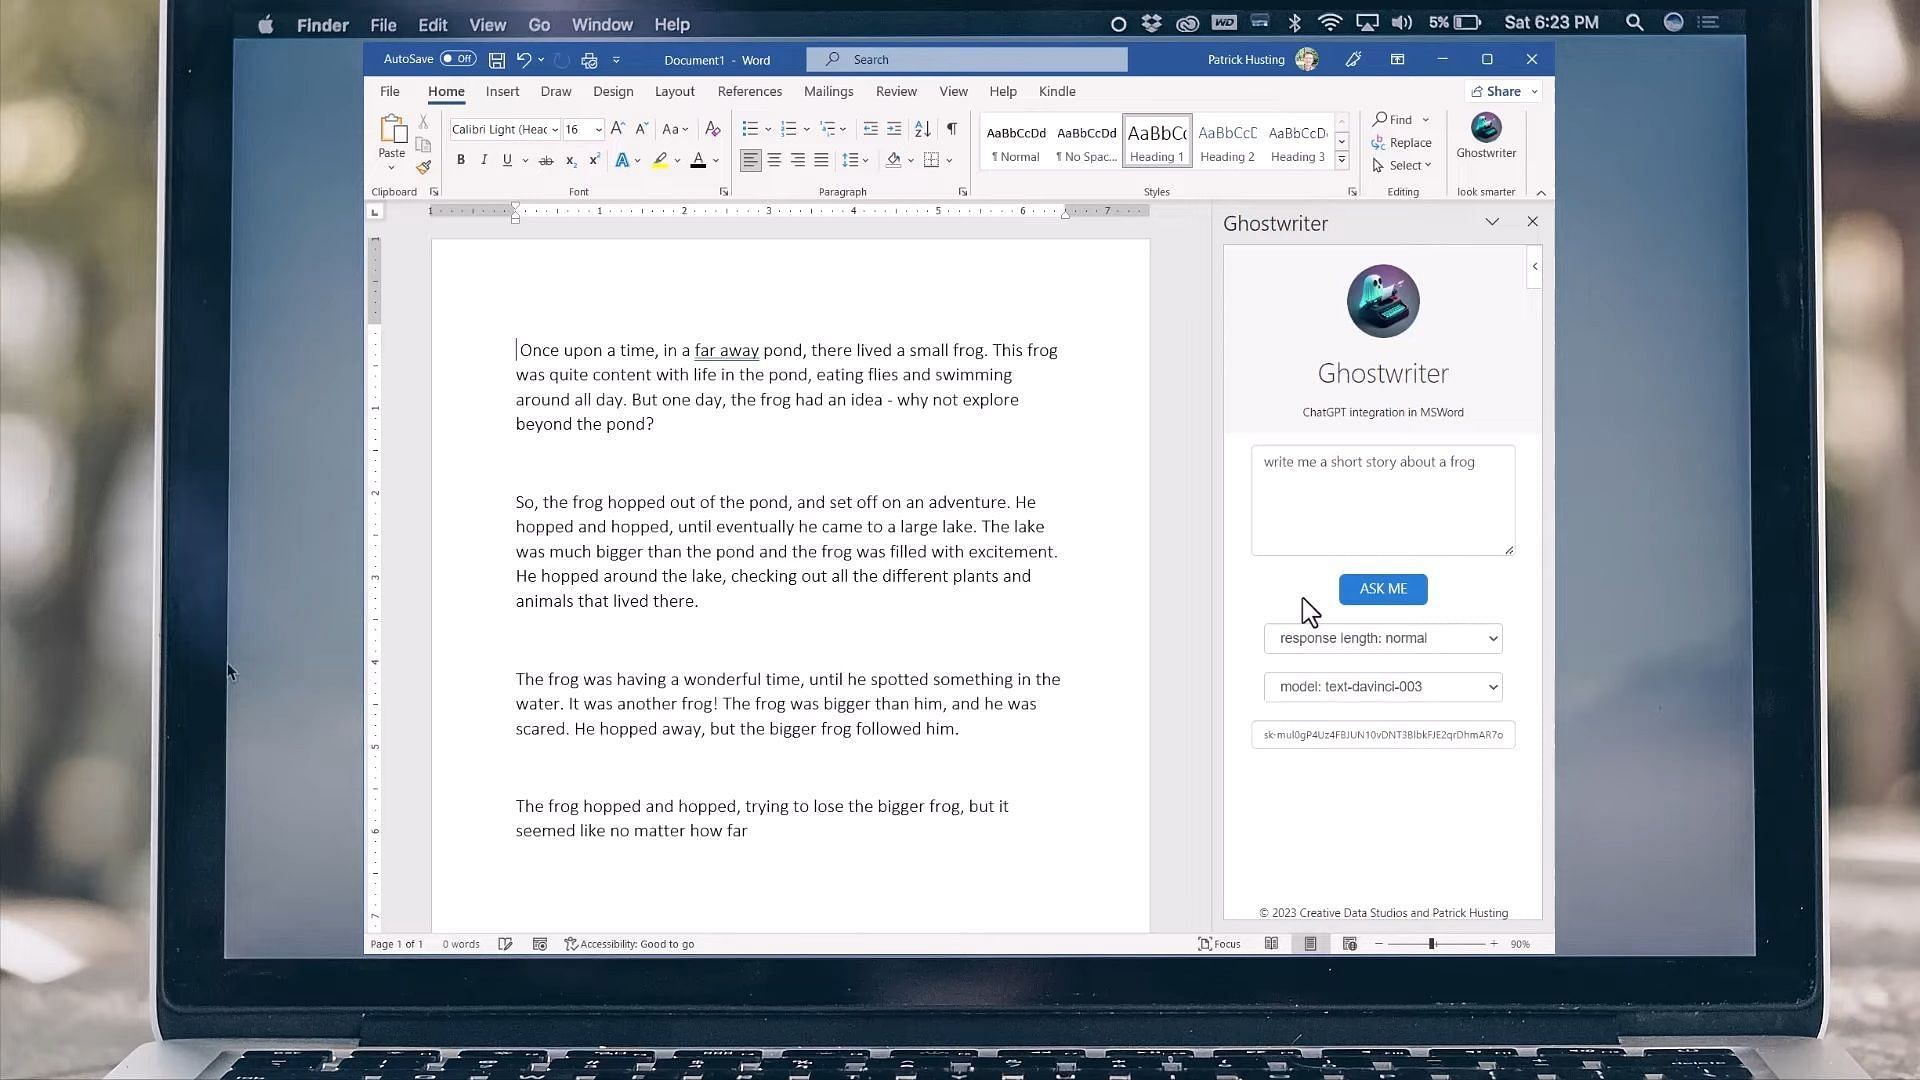 The Ghostwriter add-on syncs the use of ChatGPT with Microsoft Word (Image via Patrick Husting)